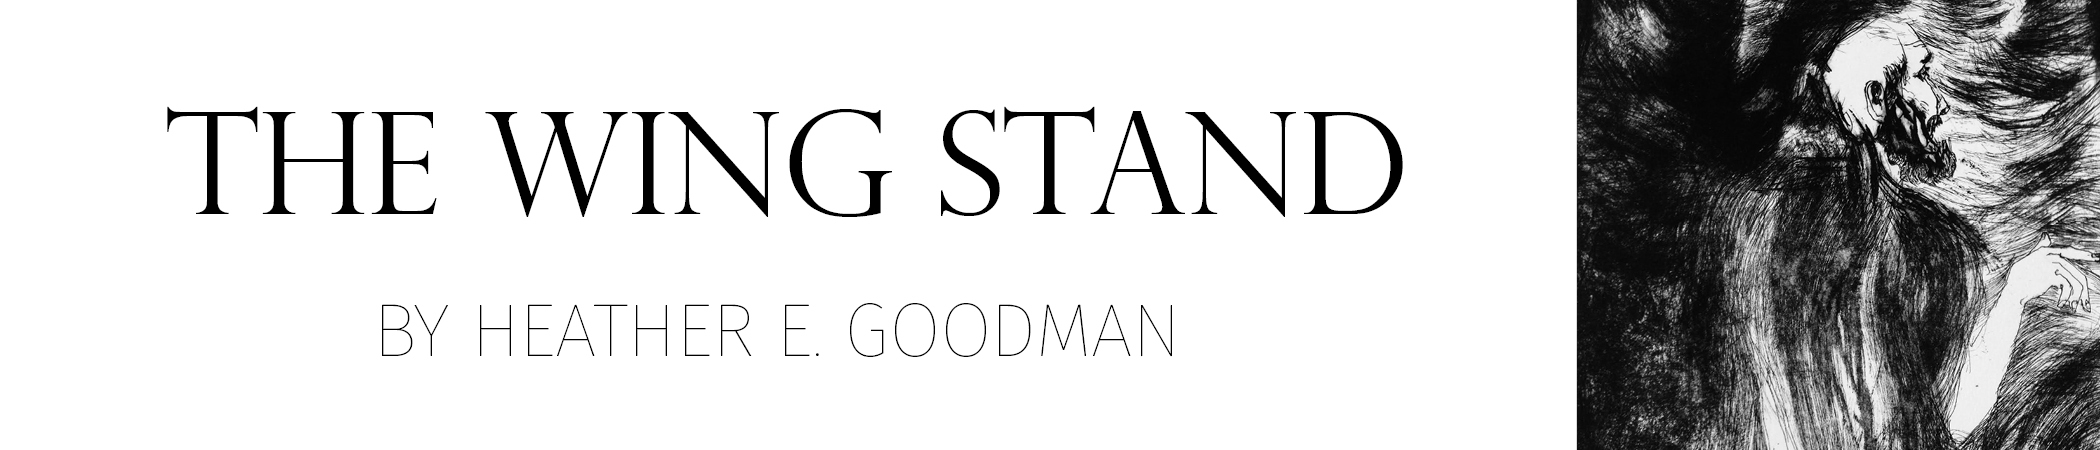 The Wing Stand by Heather Goodman